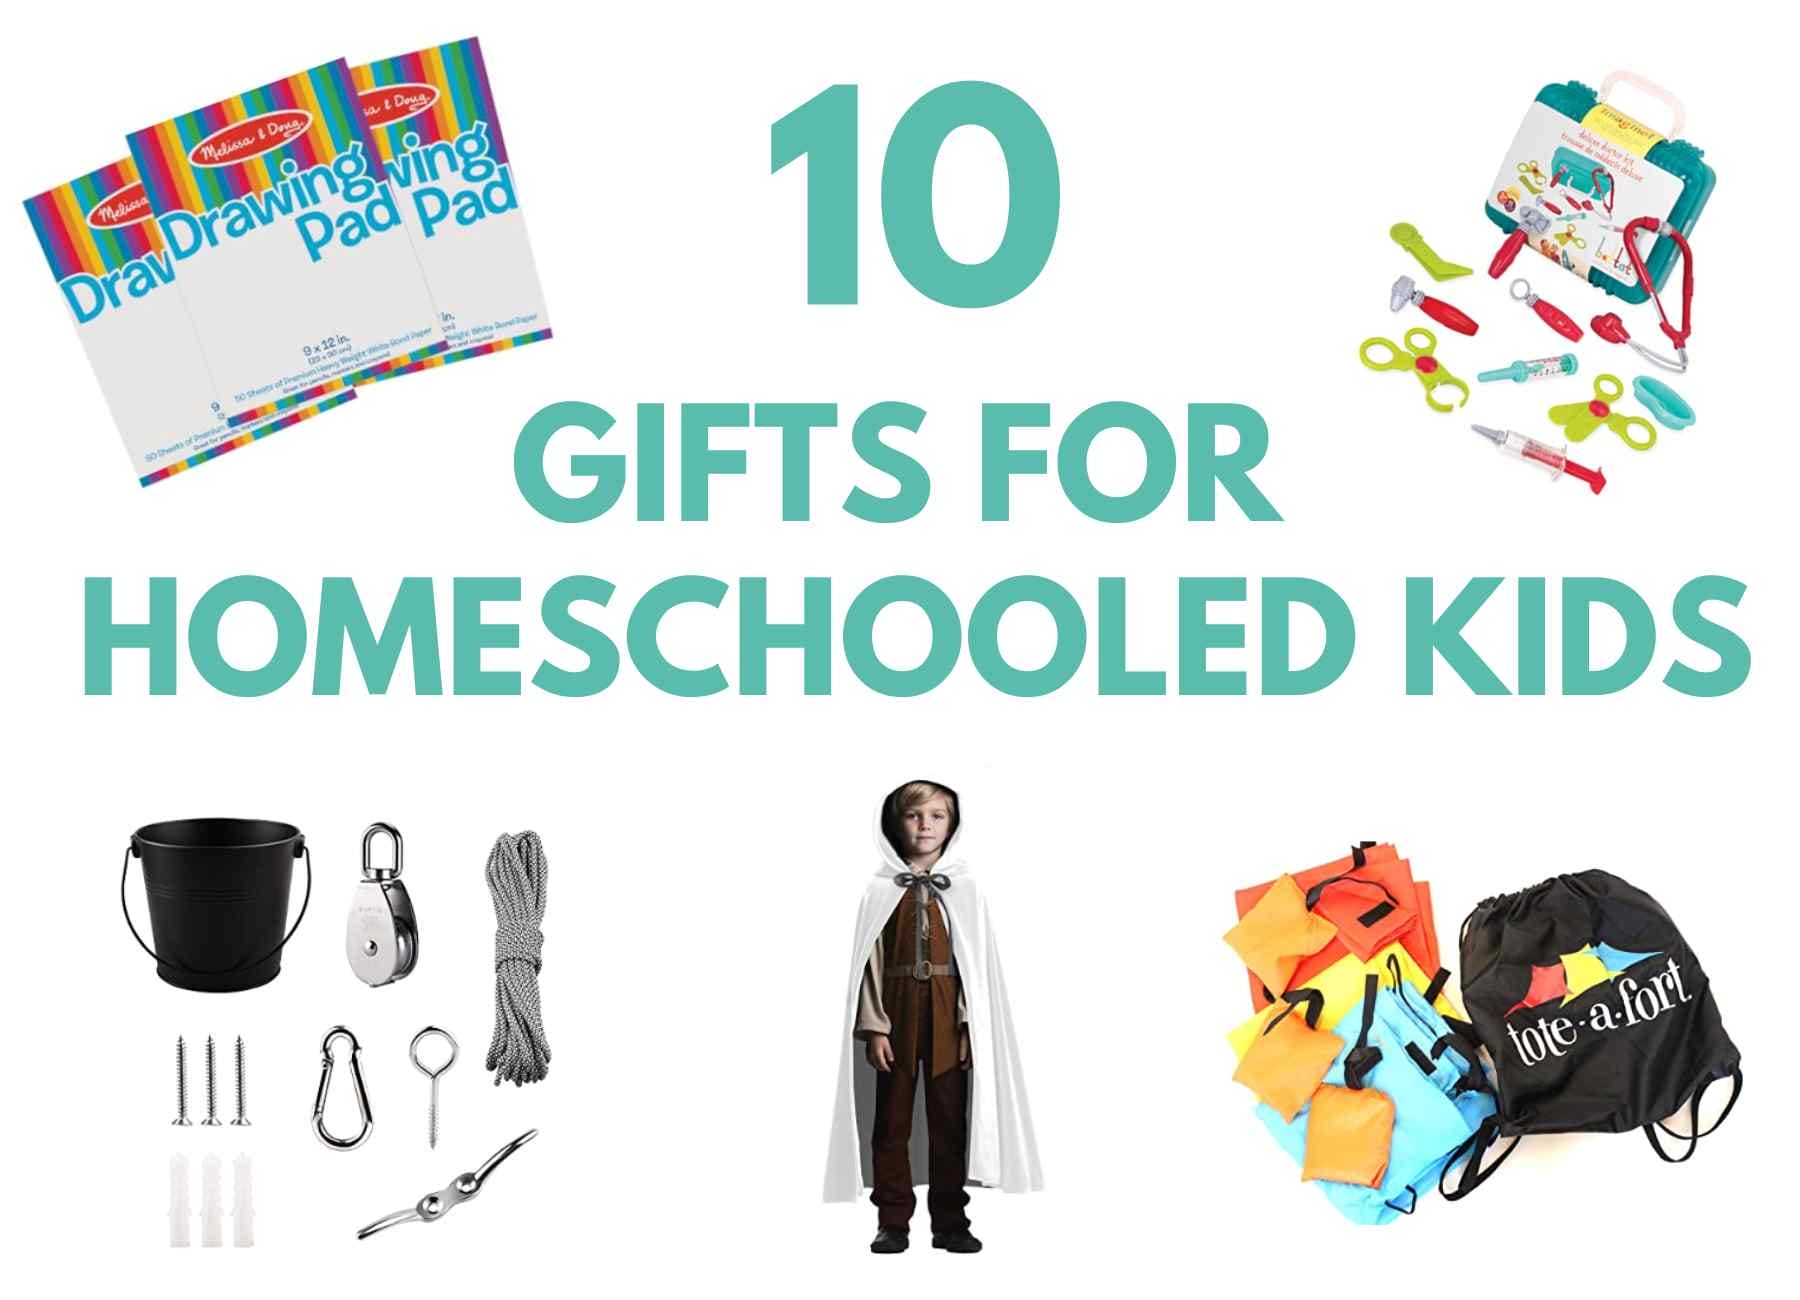 7 Fun Homeschool Activities with These Super Cool Art Supplies